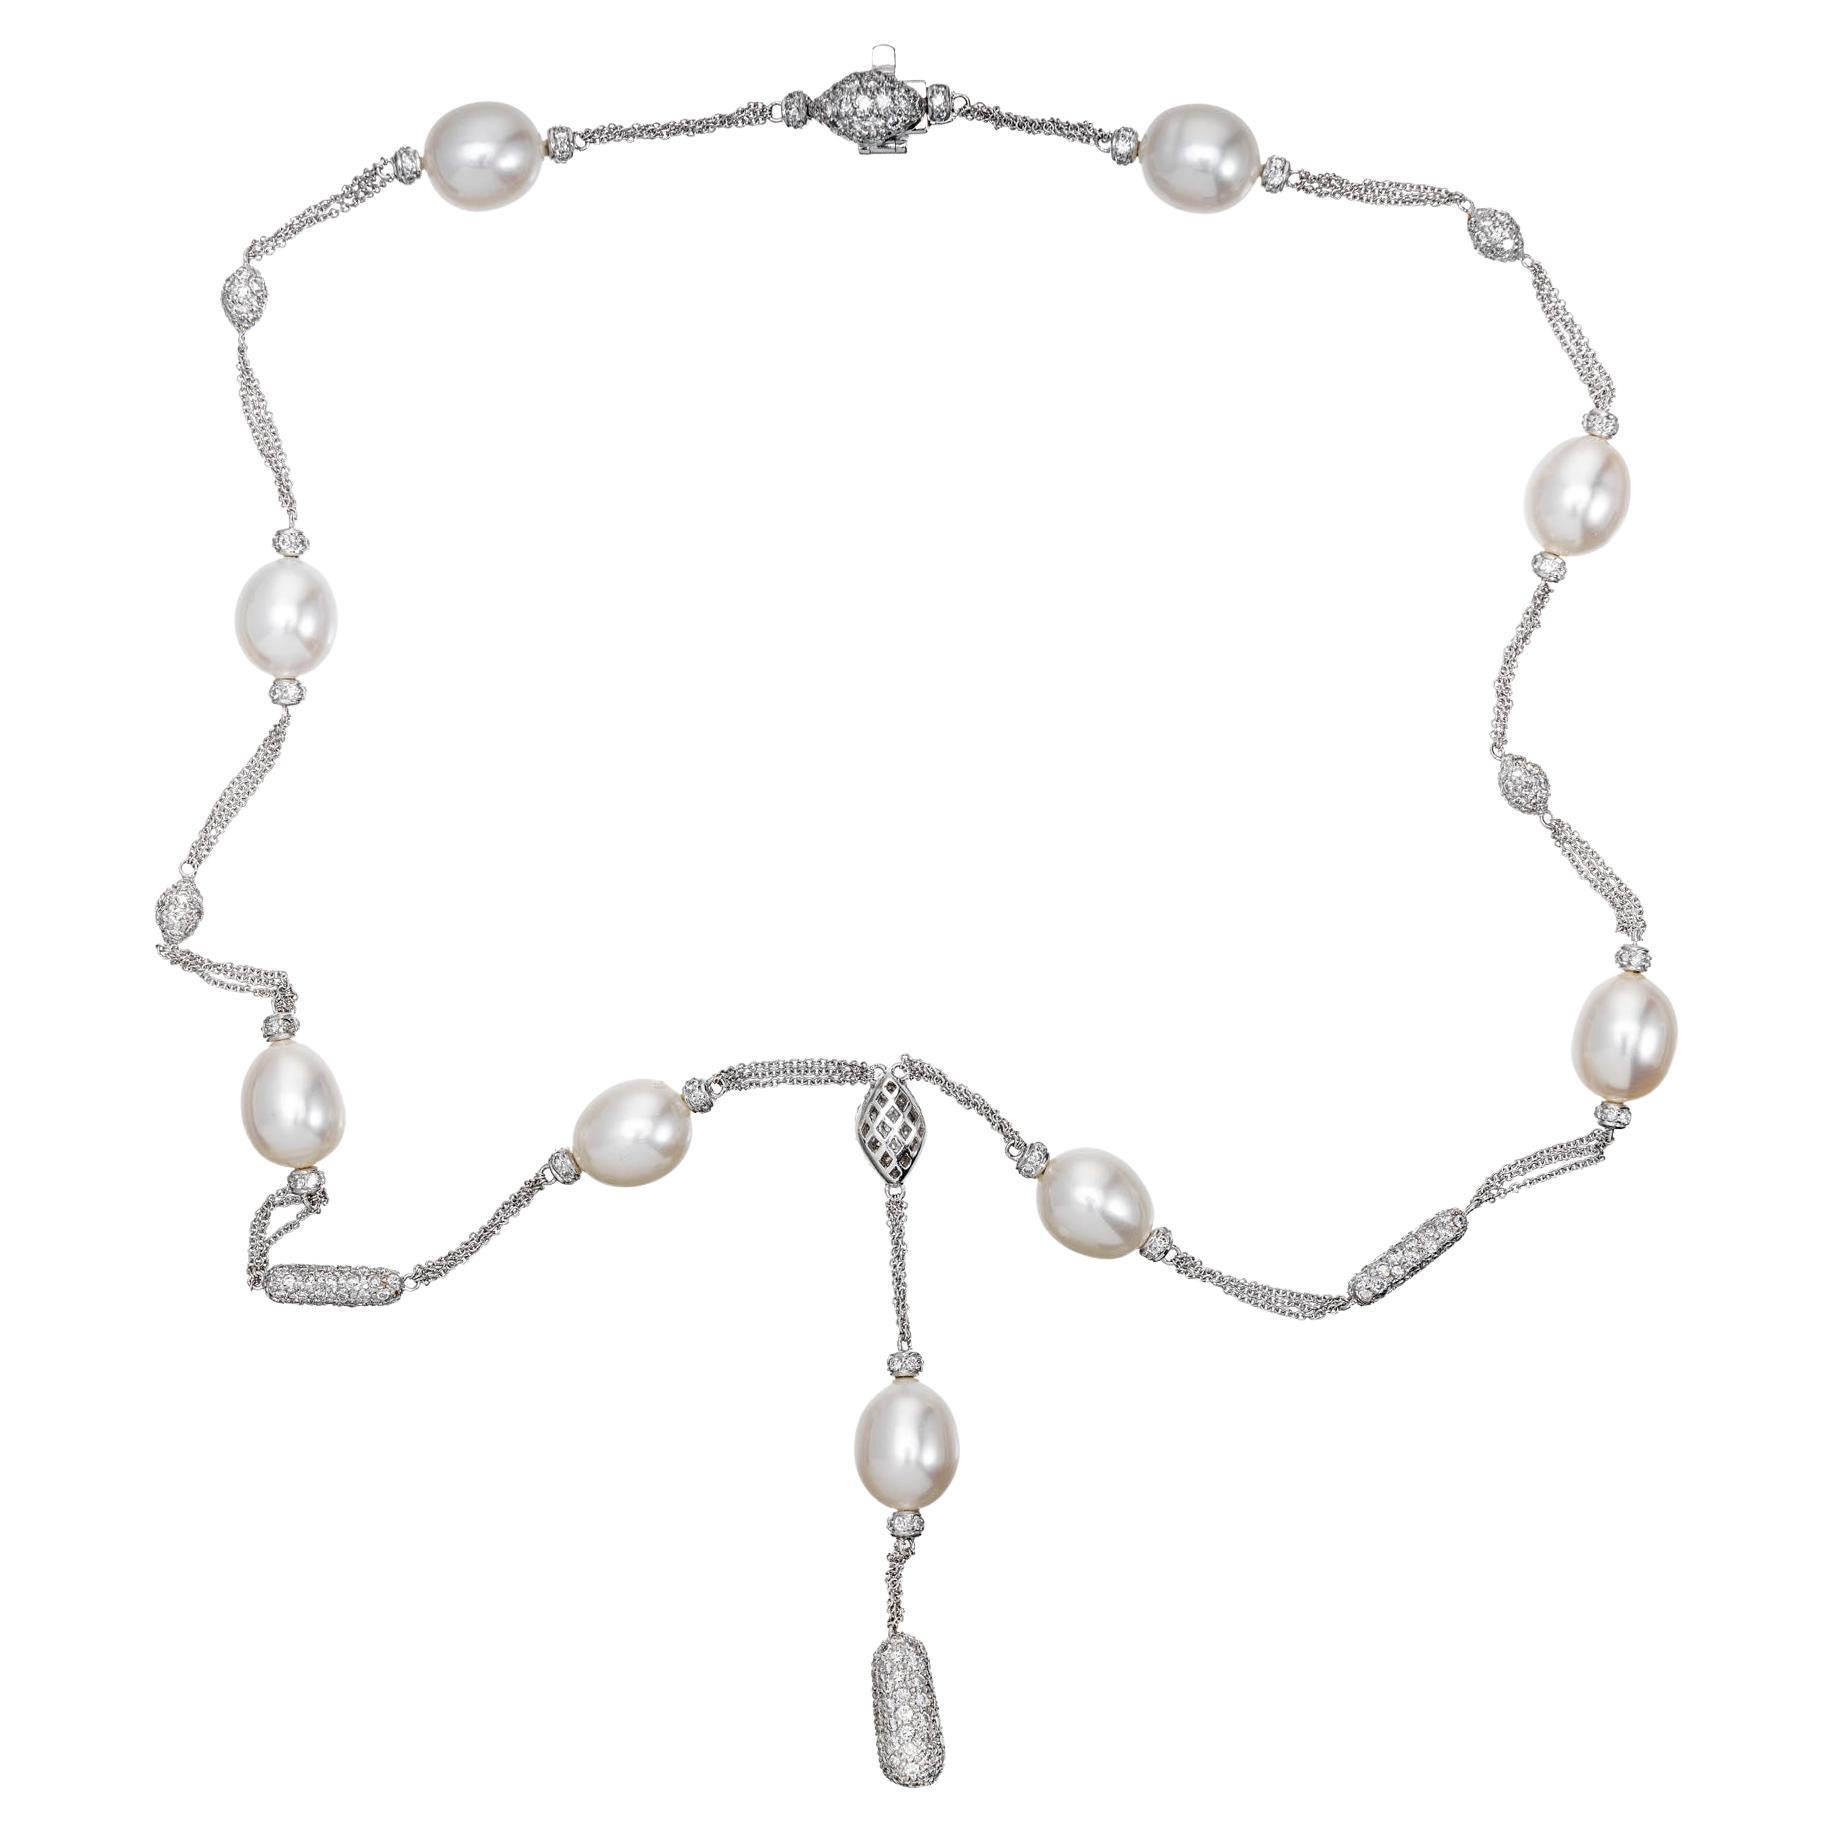 Pearl and diamond drop necklace. 9 freshwater peals with pave set diamond roundels on each side of the pearls. Diamond pave set ovals and bars are stationed in between the pearls with a larger diamond pave oval, bar and pearl drop at the center of